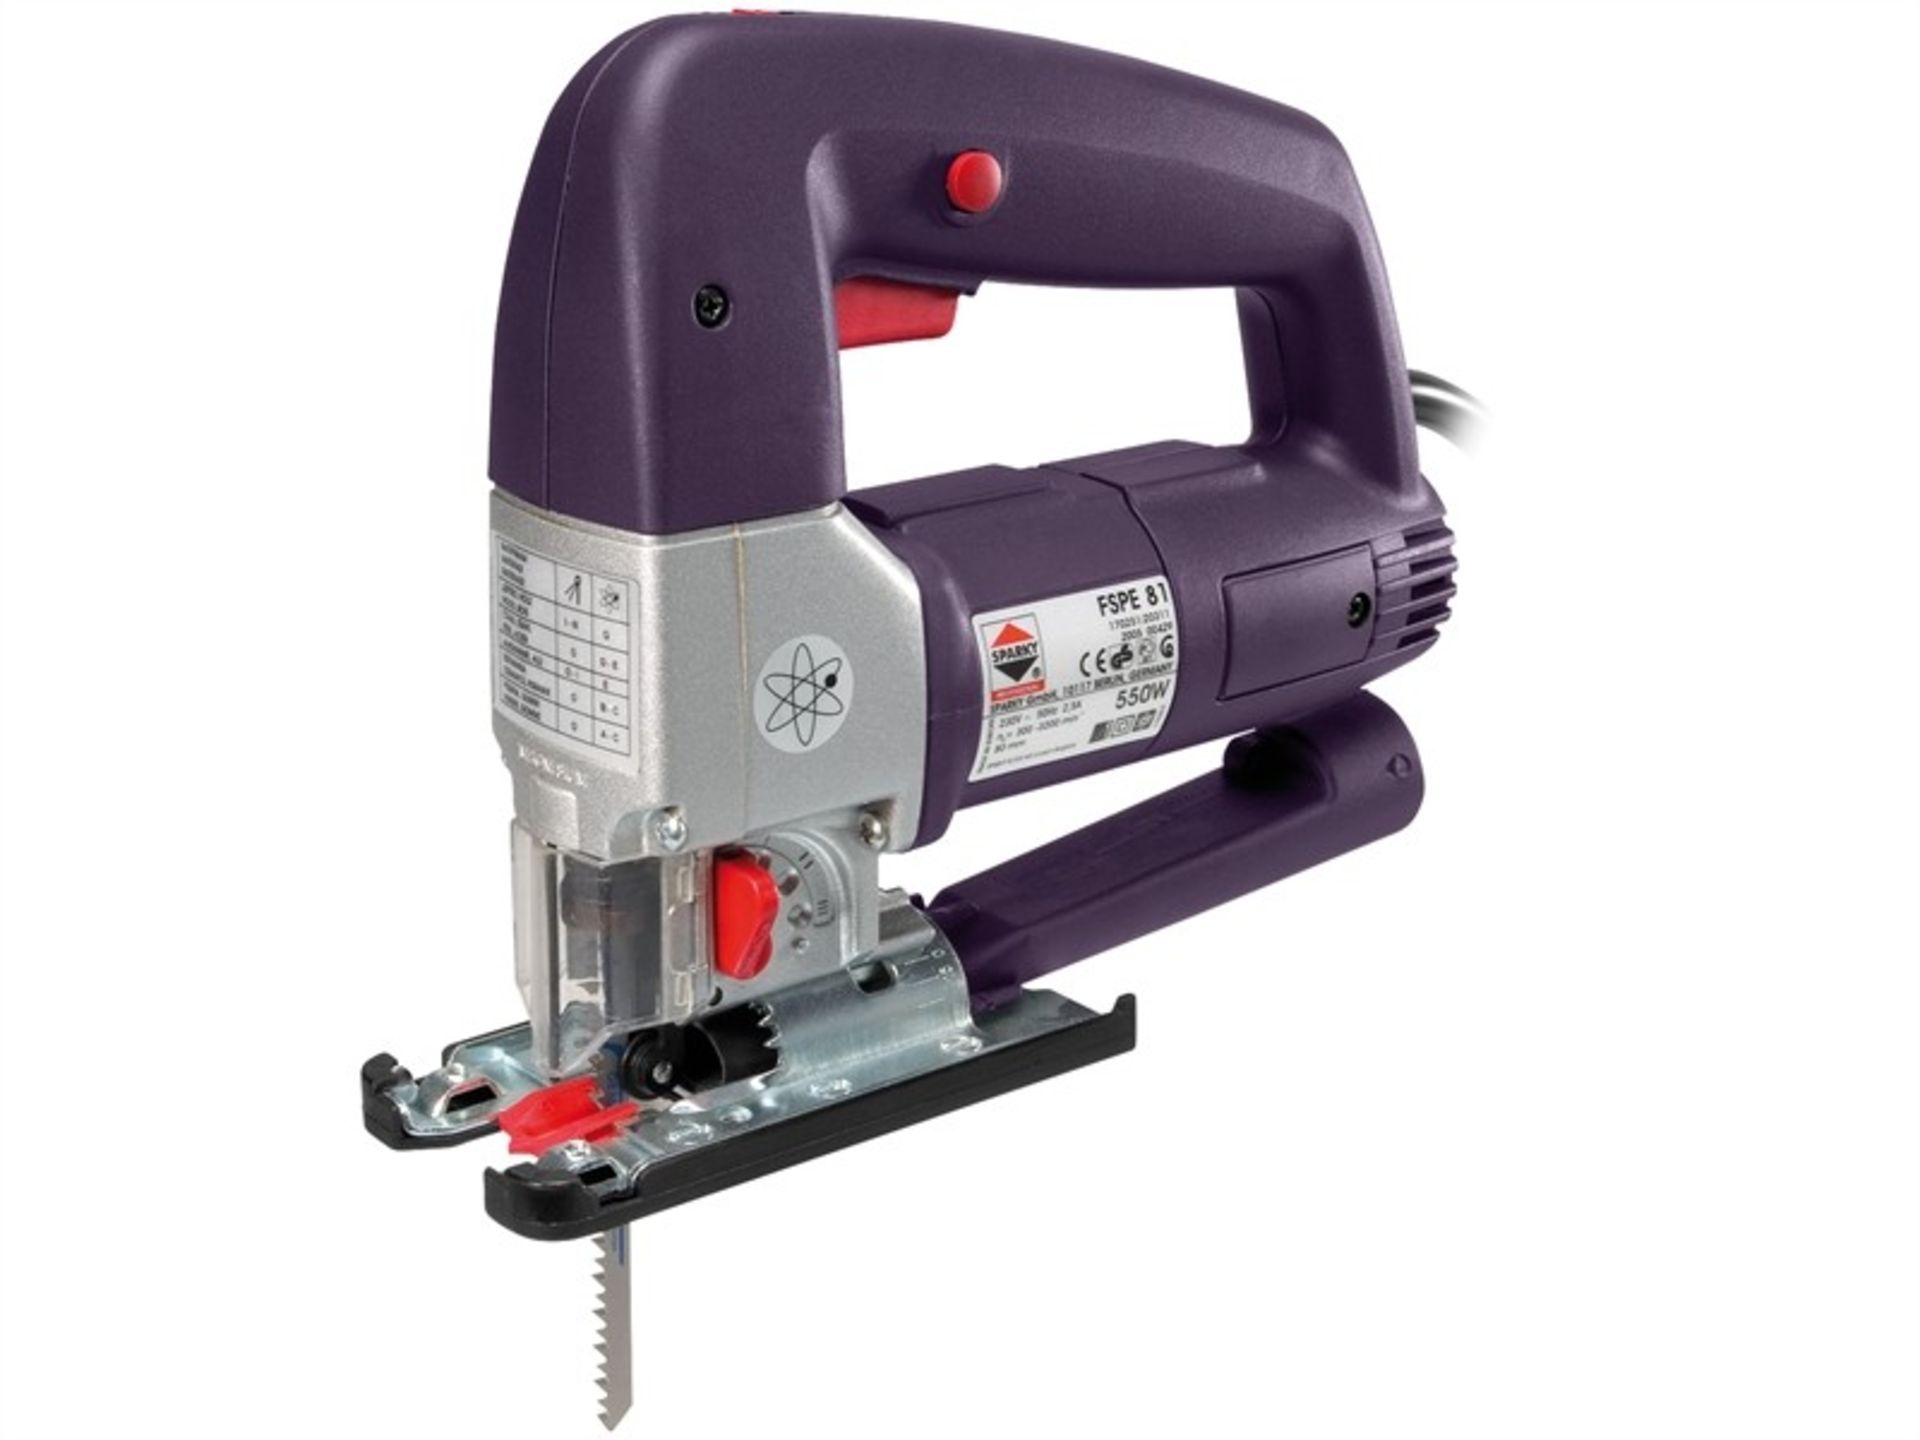 V Brand New Sparky FSPE81 Professional Pendulum Action 110v/550w Jigsaw With 3 Position Adjustable